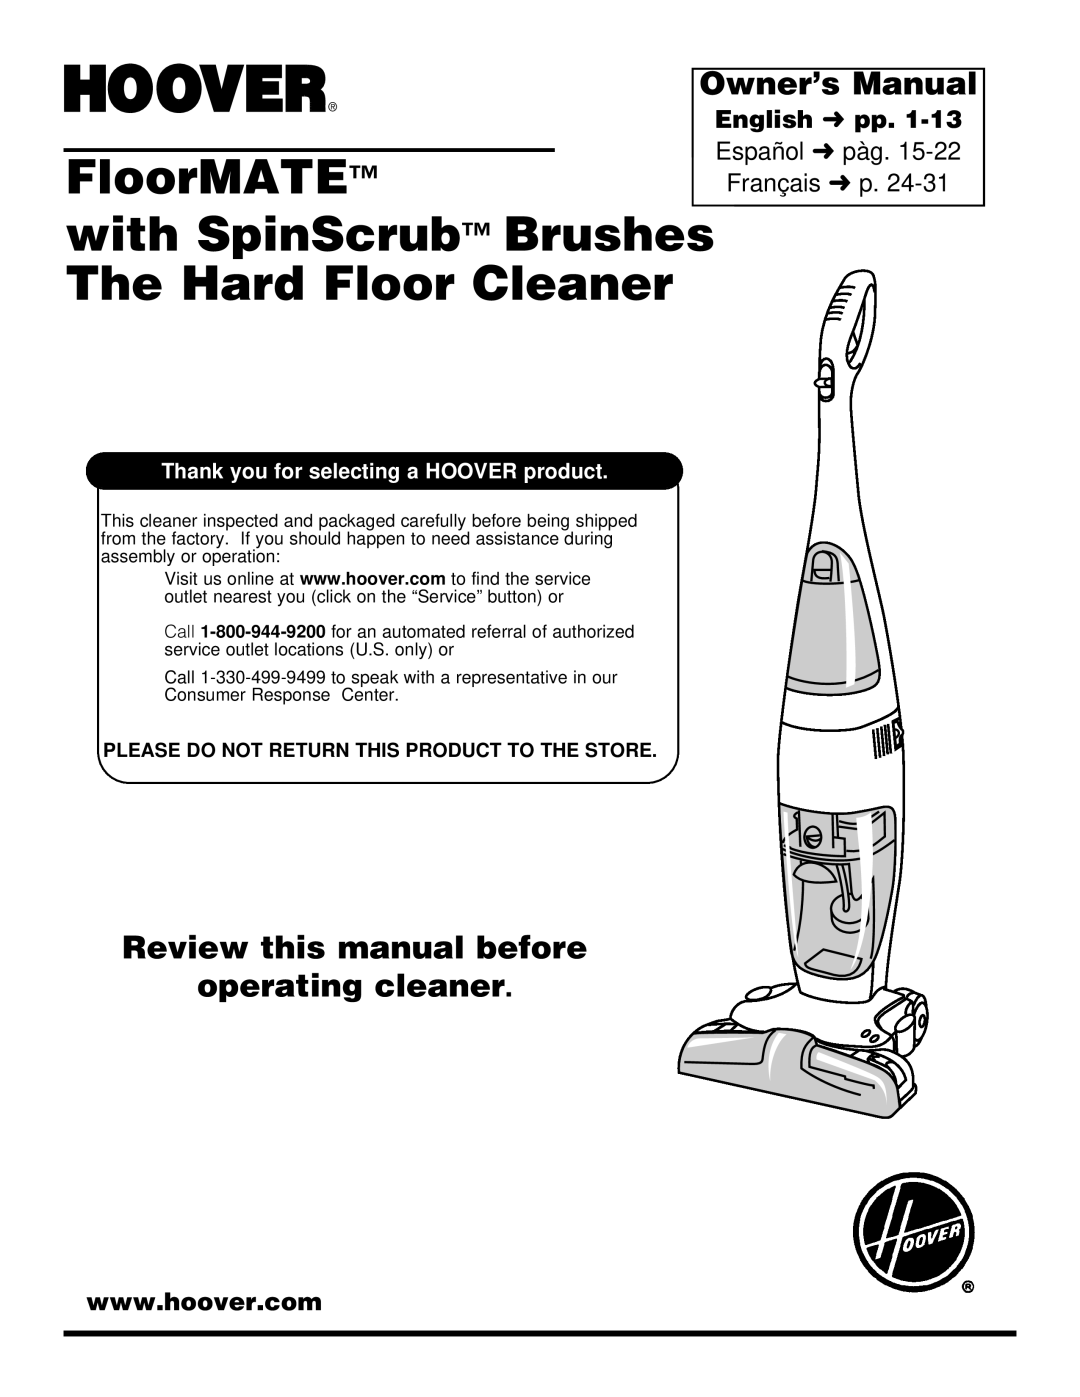 Hoover Hard Floor Cleaner owner manual Review this manual before operating cleaner, FloorMATE 